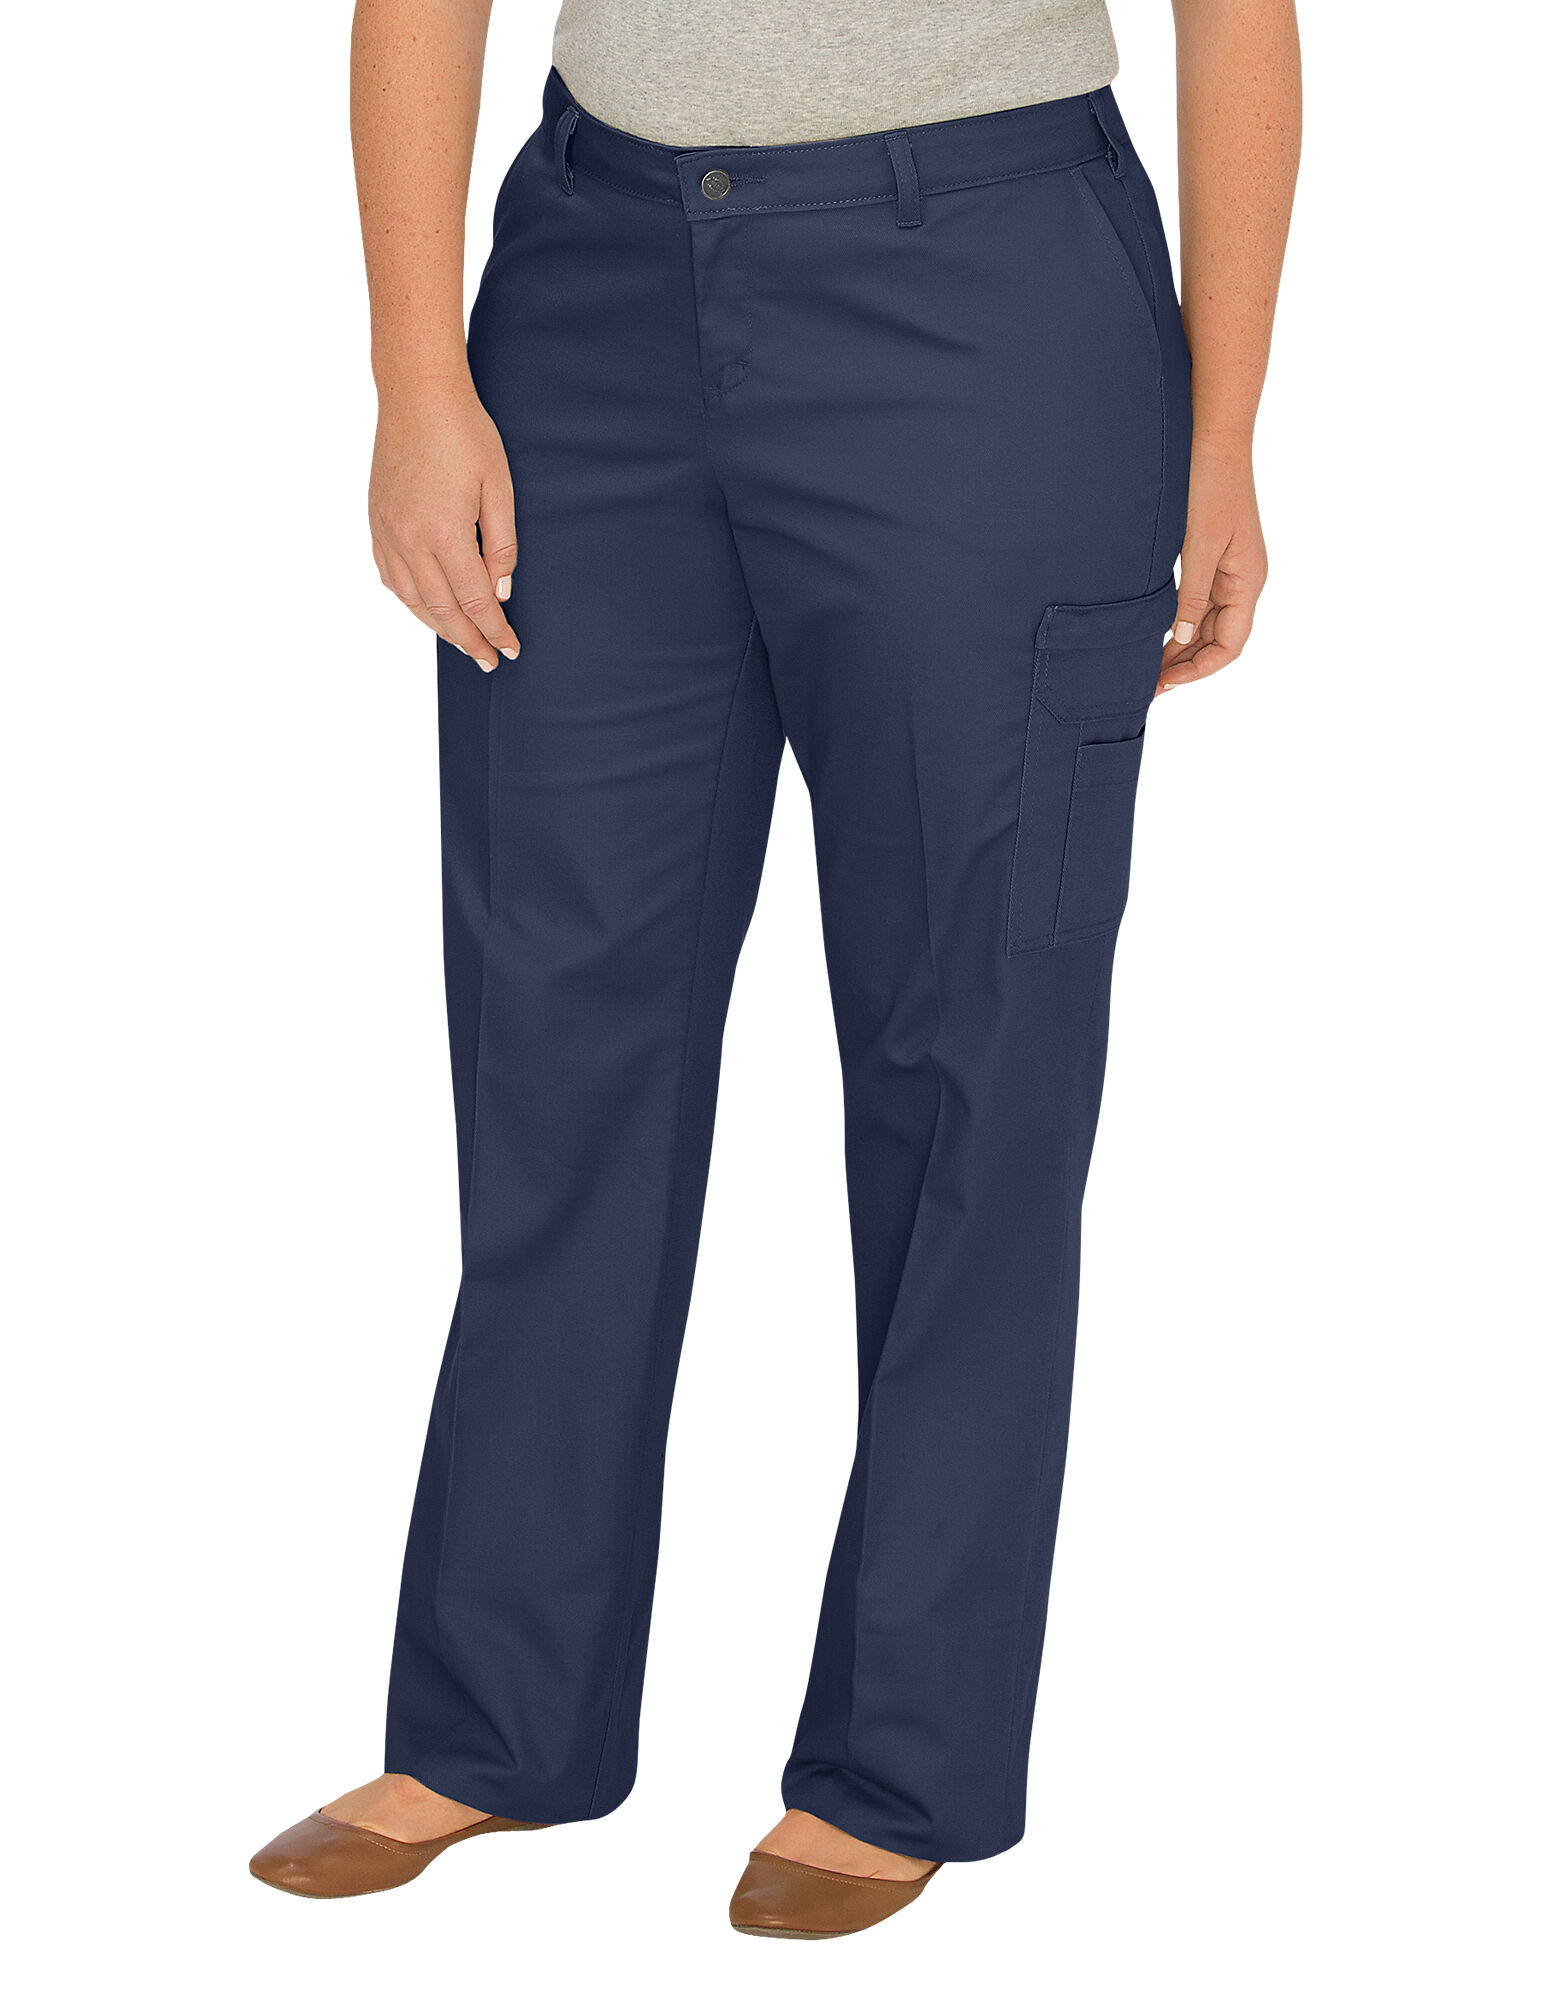 Women's Relaxed Fit Straight Leg Cargo Pants (Plus) Navy Blue | Dickies